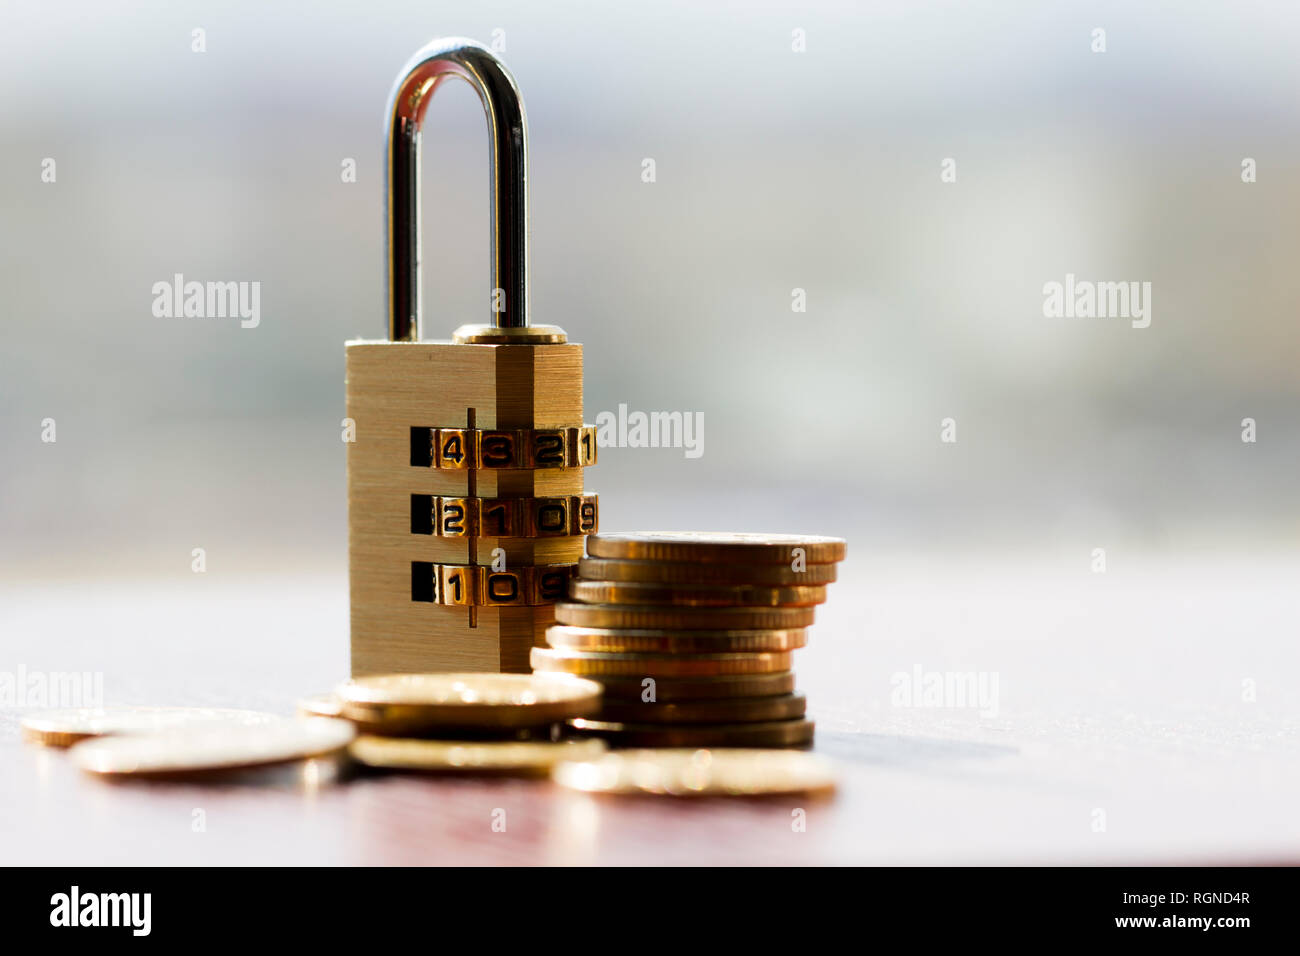 Money and lock, financial and economic security and protection Stock Photo